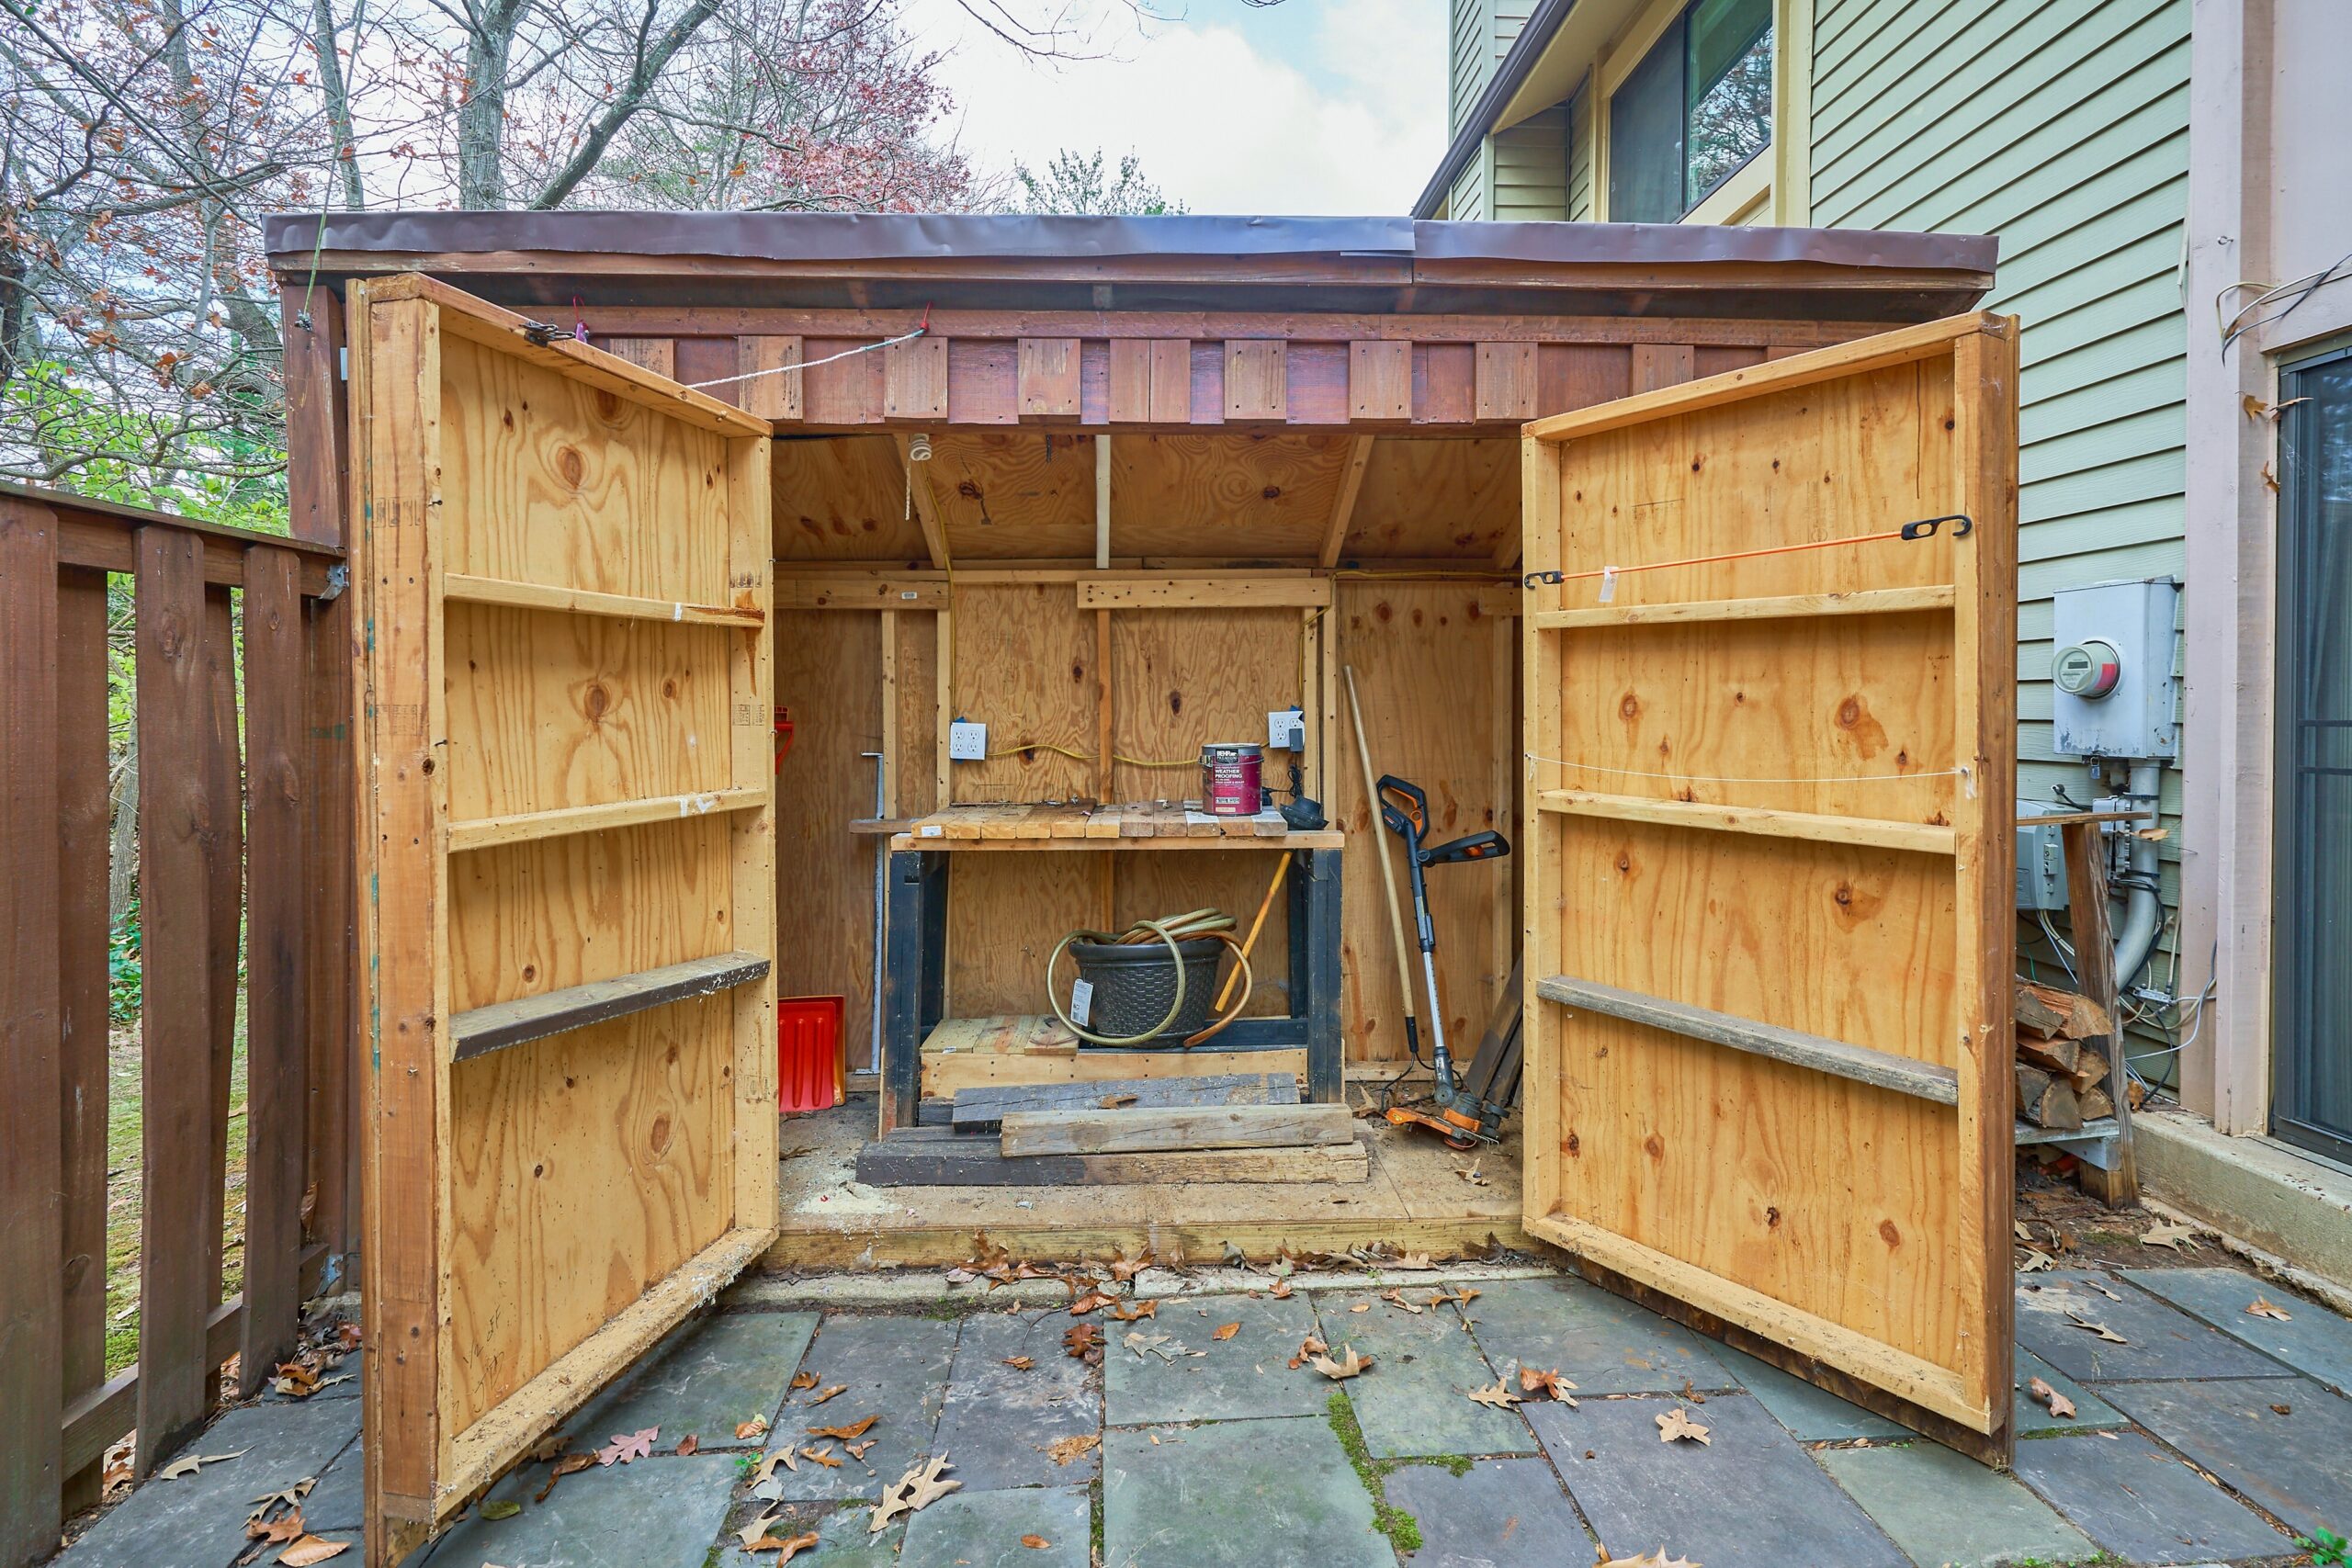 Professional exterior photo of 10675 Spring Oak Ct - showing the backyard work shed opened up to reveal the work table and storage area for tools and equipment on a stone patio